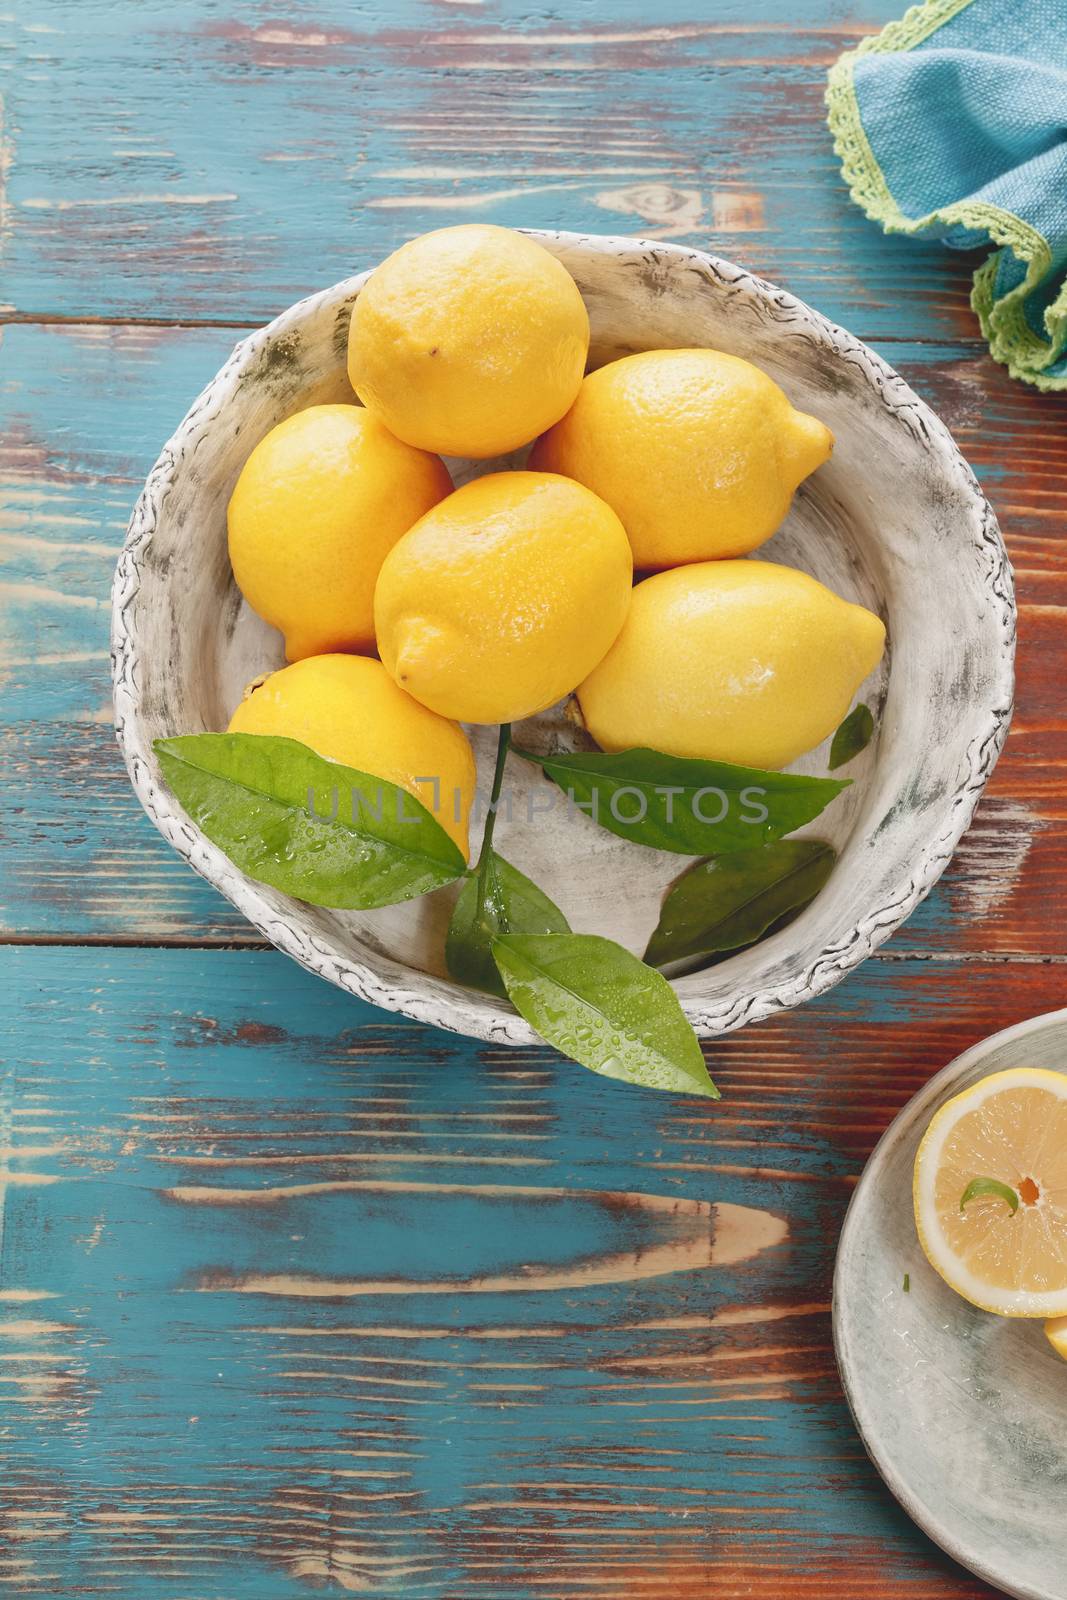 Fresh lemons with leaves in rustic ceramic bowl over wooden background. Macro, selective focus, vintage style. Natural light